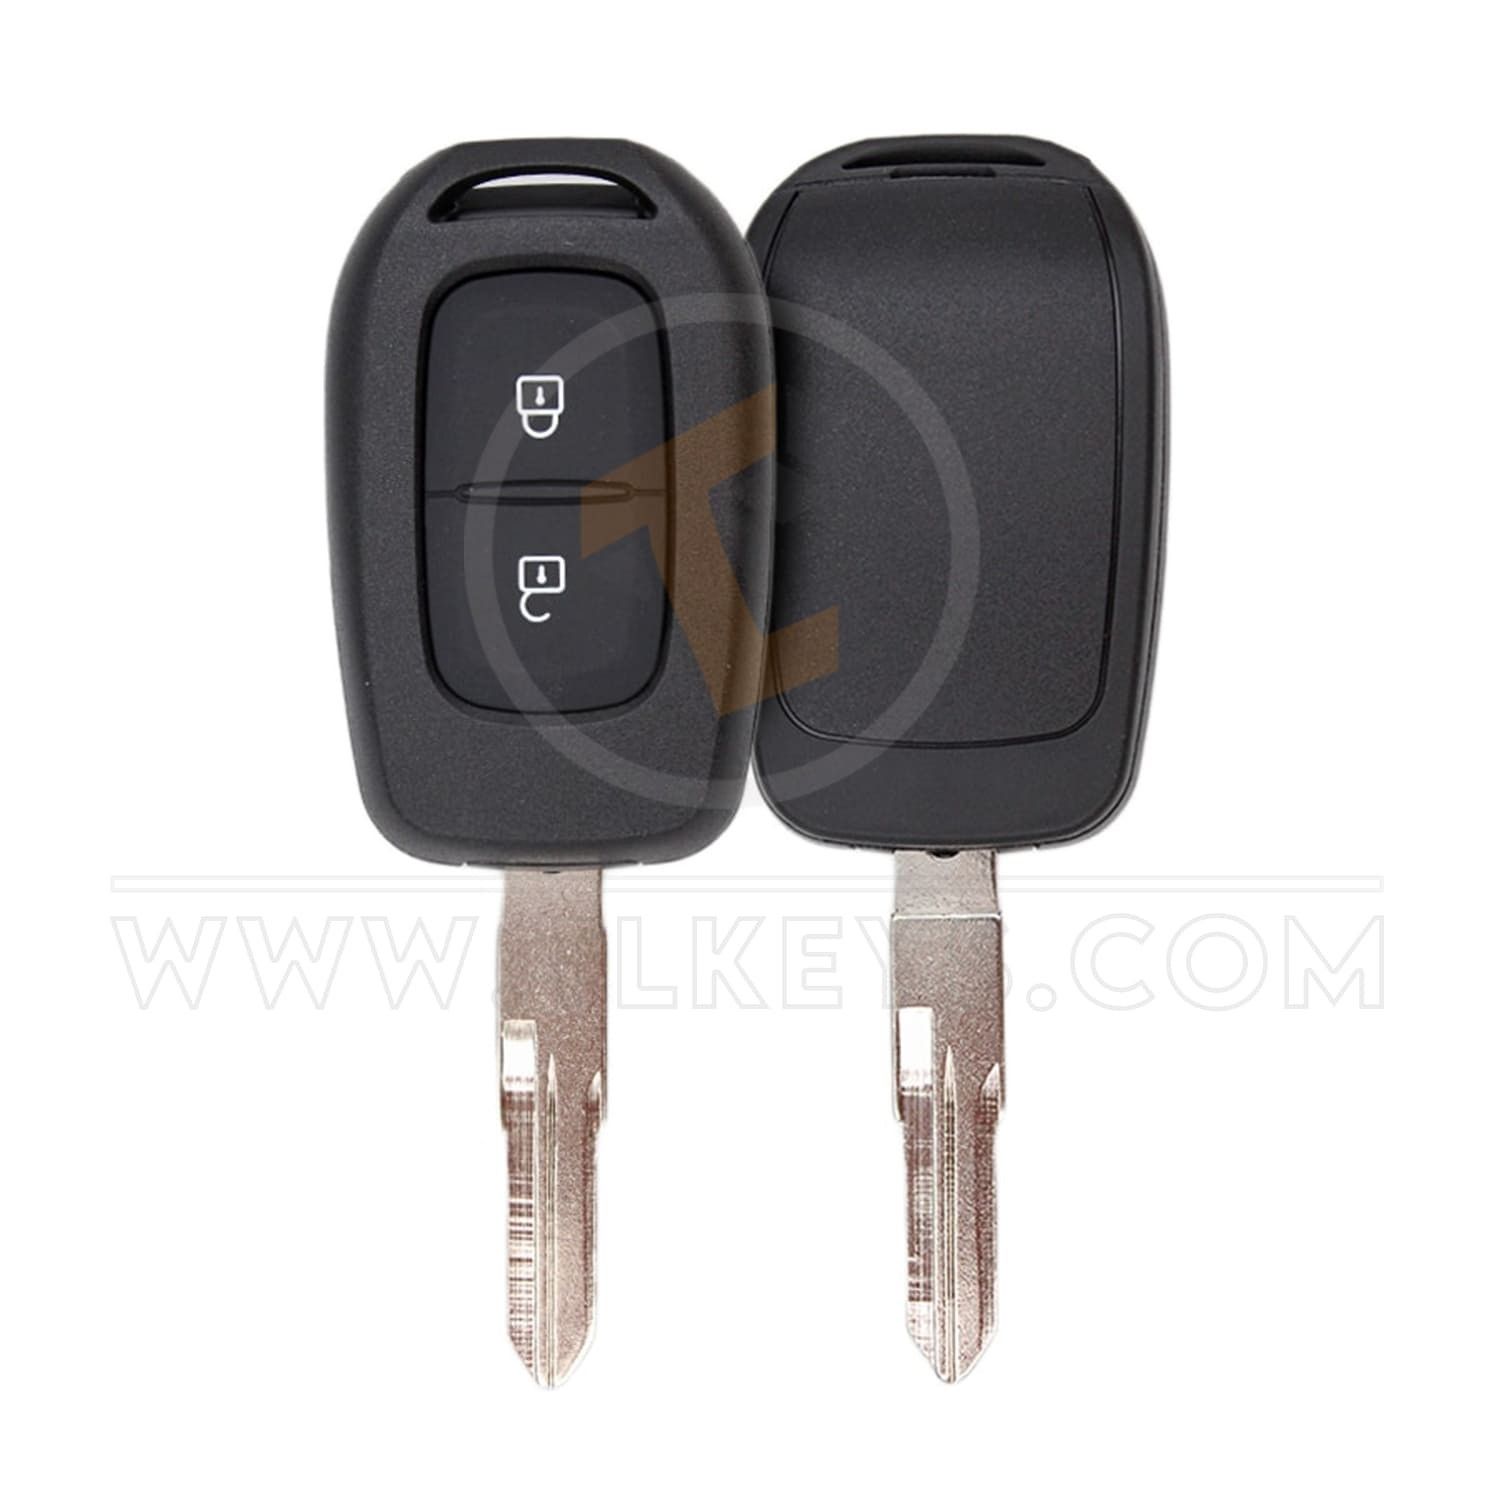  Renault Duster Dacia Head Key Remote 2015 2018 433MHz 2 Buttons Buttons 2